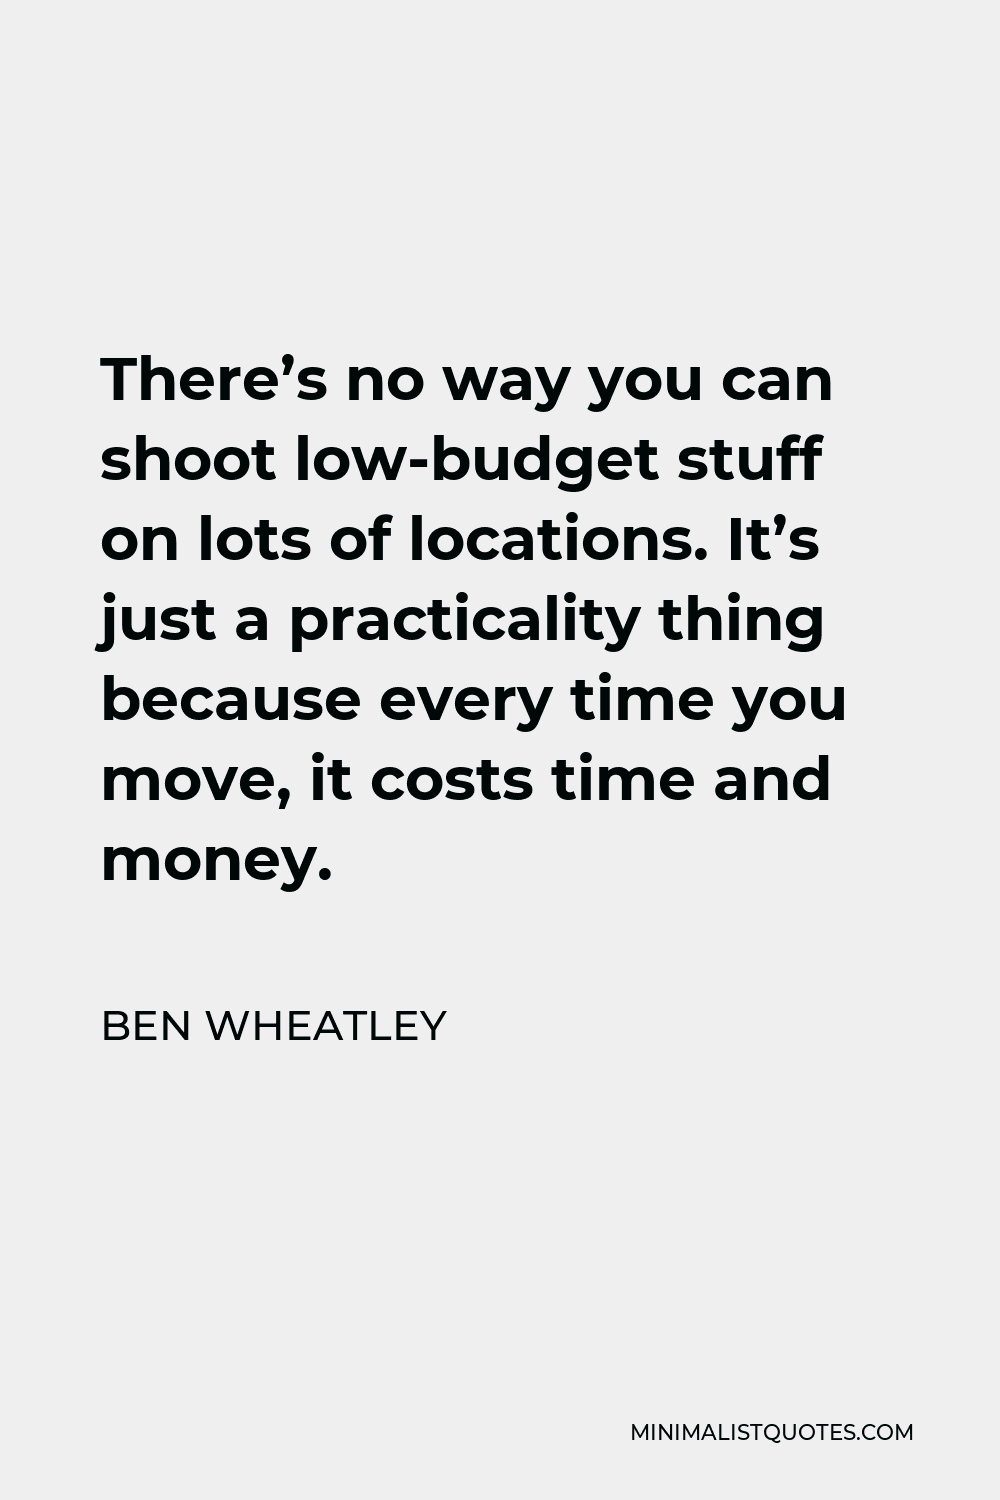 Ben Wheatley Quote - There’s no way you can shoot low-budget stuff on lots of locations. It’s just a practicality thing because every time you move, it costs time and money.